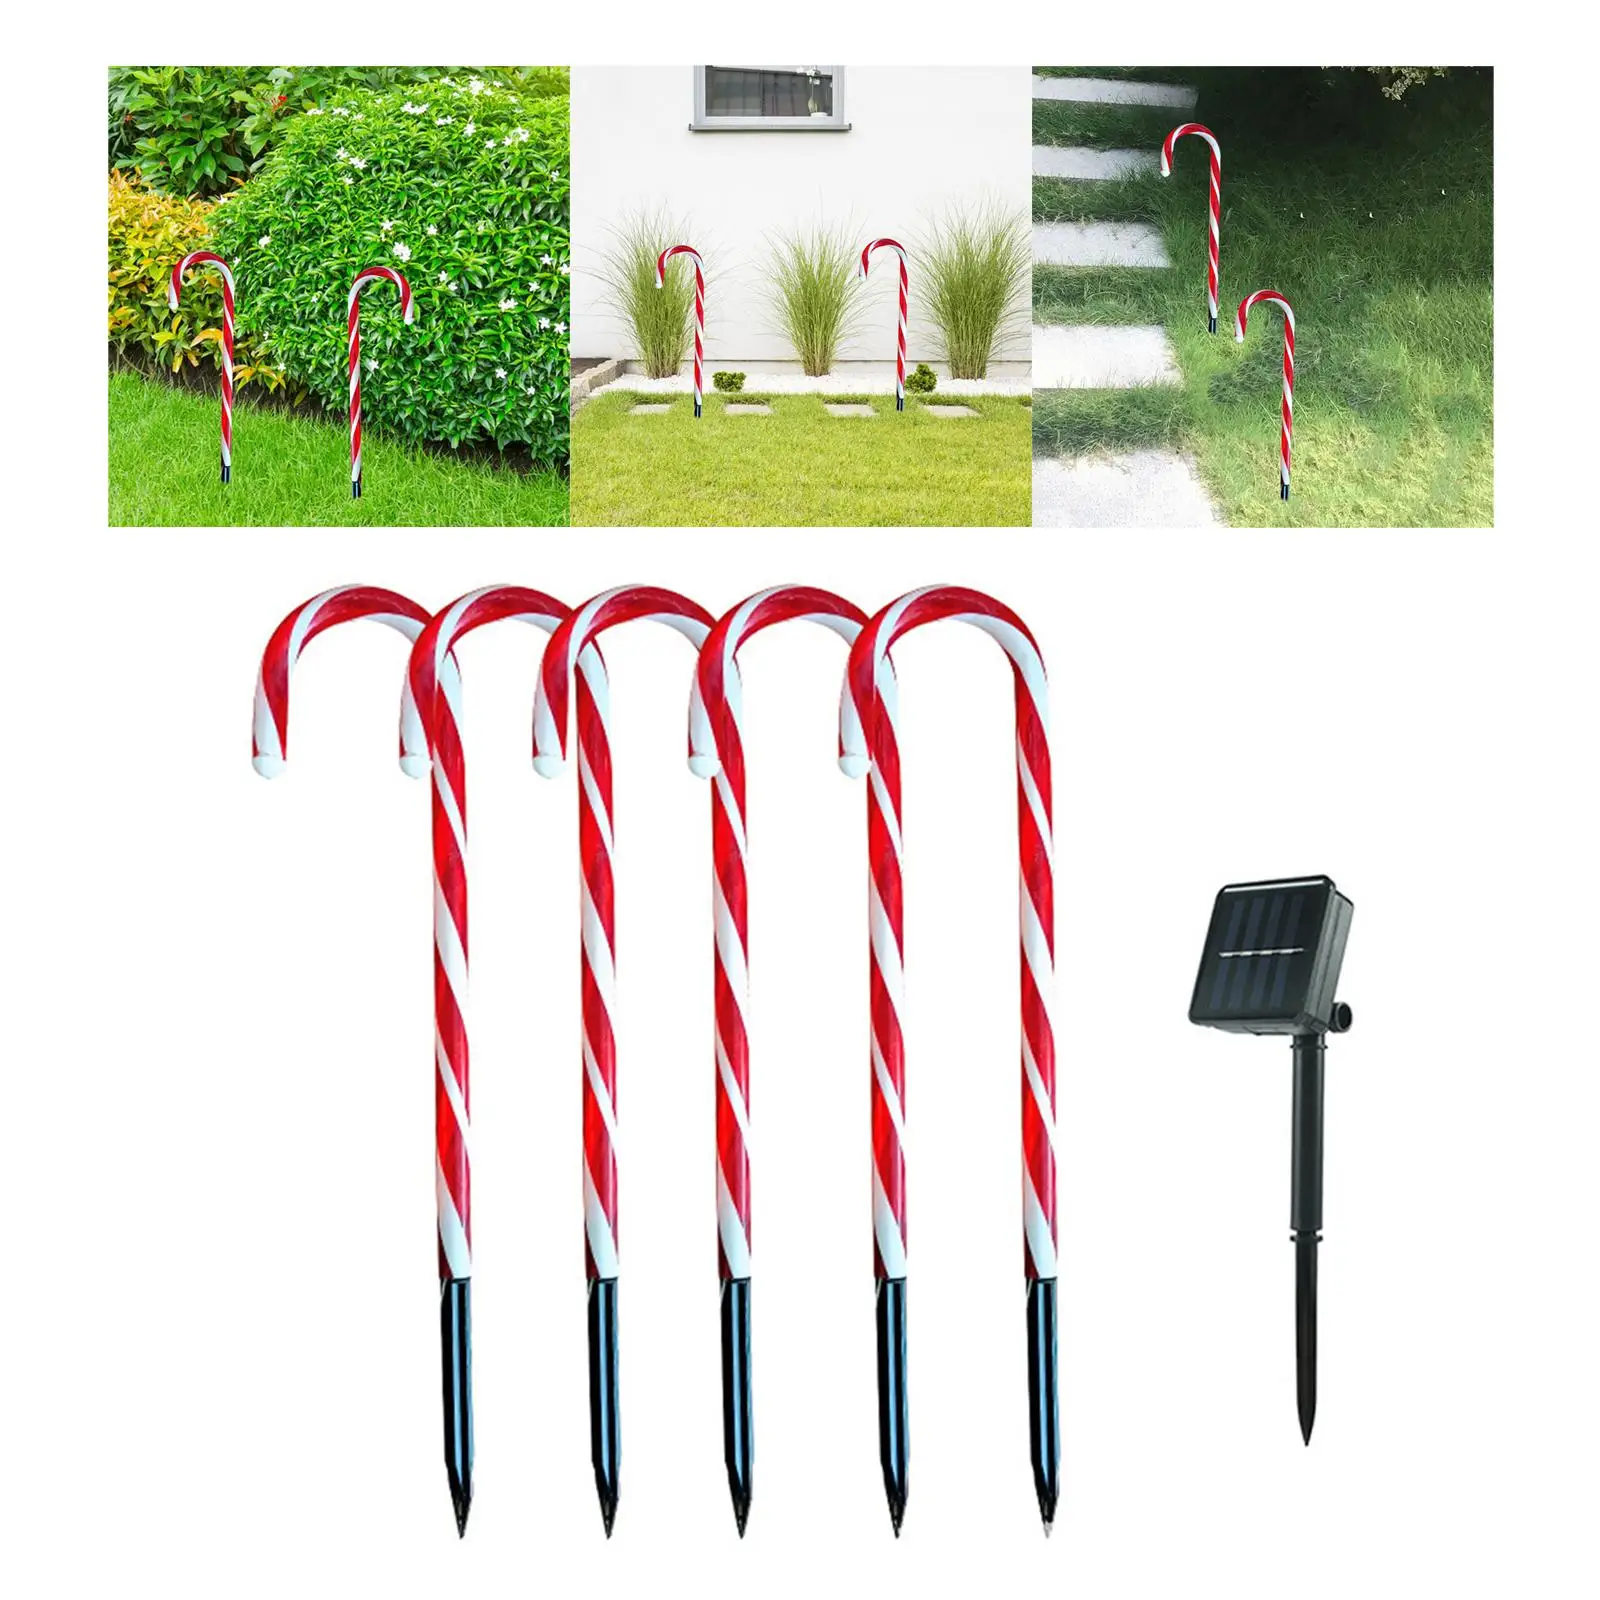 Christmas LED Lamps with Ground Stakes Candy Cane Solar Lights for Lawn Xmas